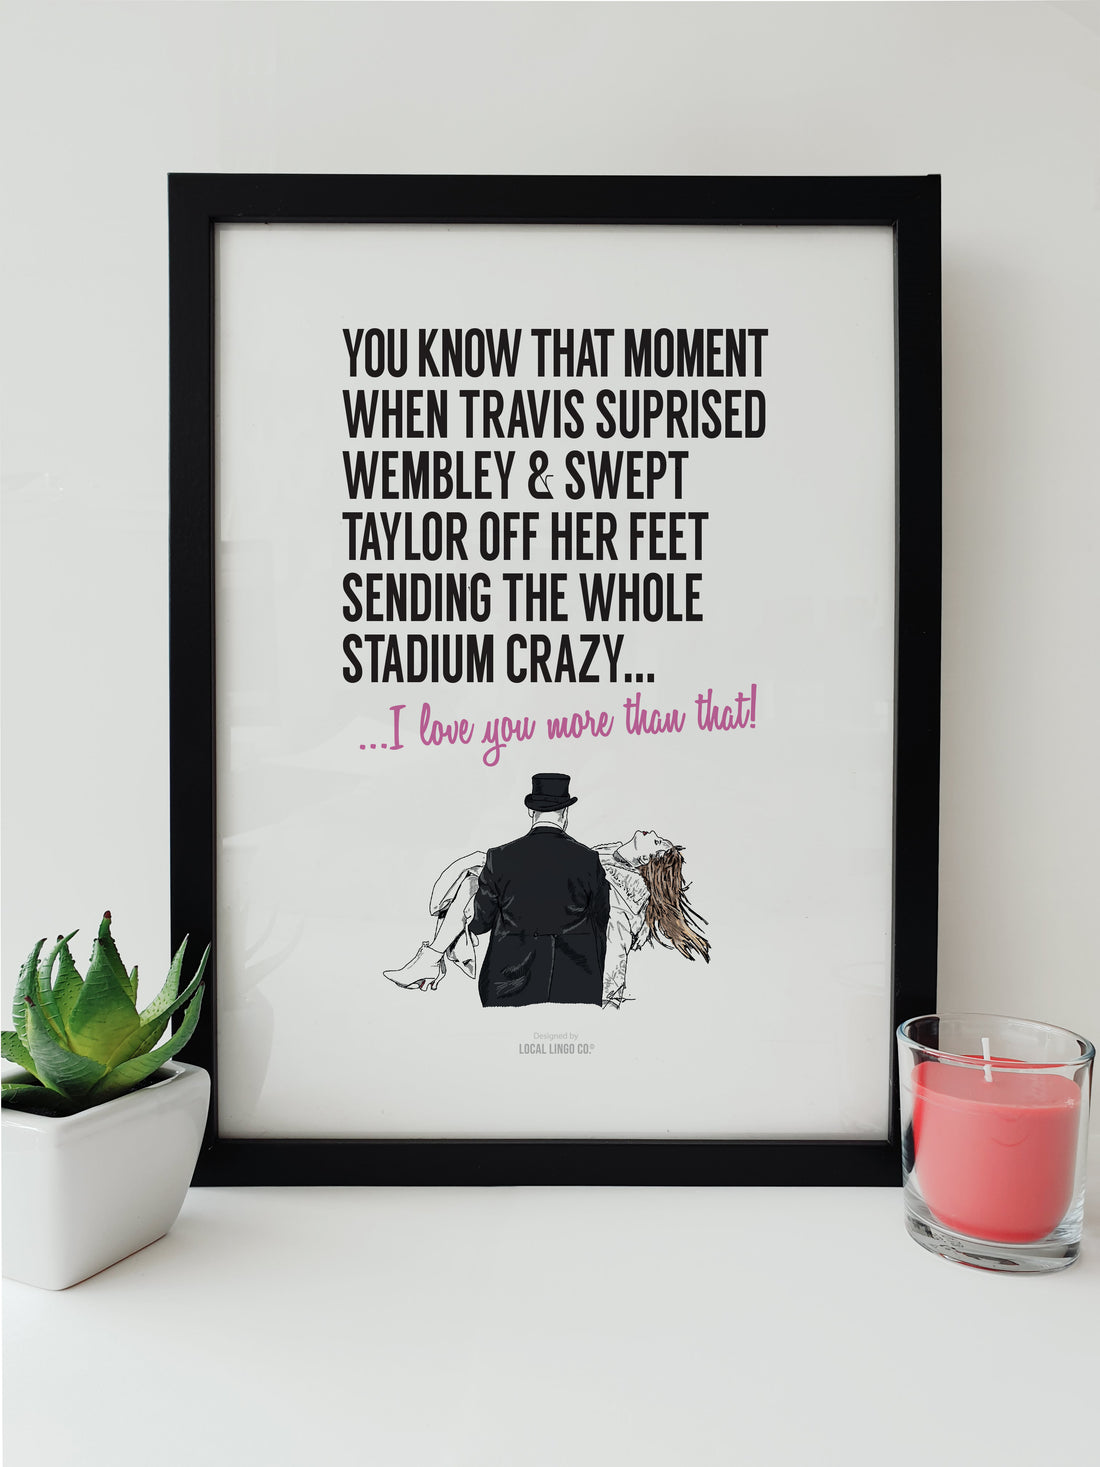 Travis and Taylor at Wembley Surprise Moment Fan Artwork by Local Lingo, featuring an illustration of Travis sweeping Taylor off her feet and bold text in a black frame.